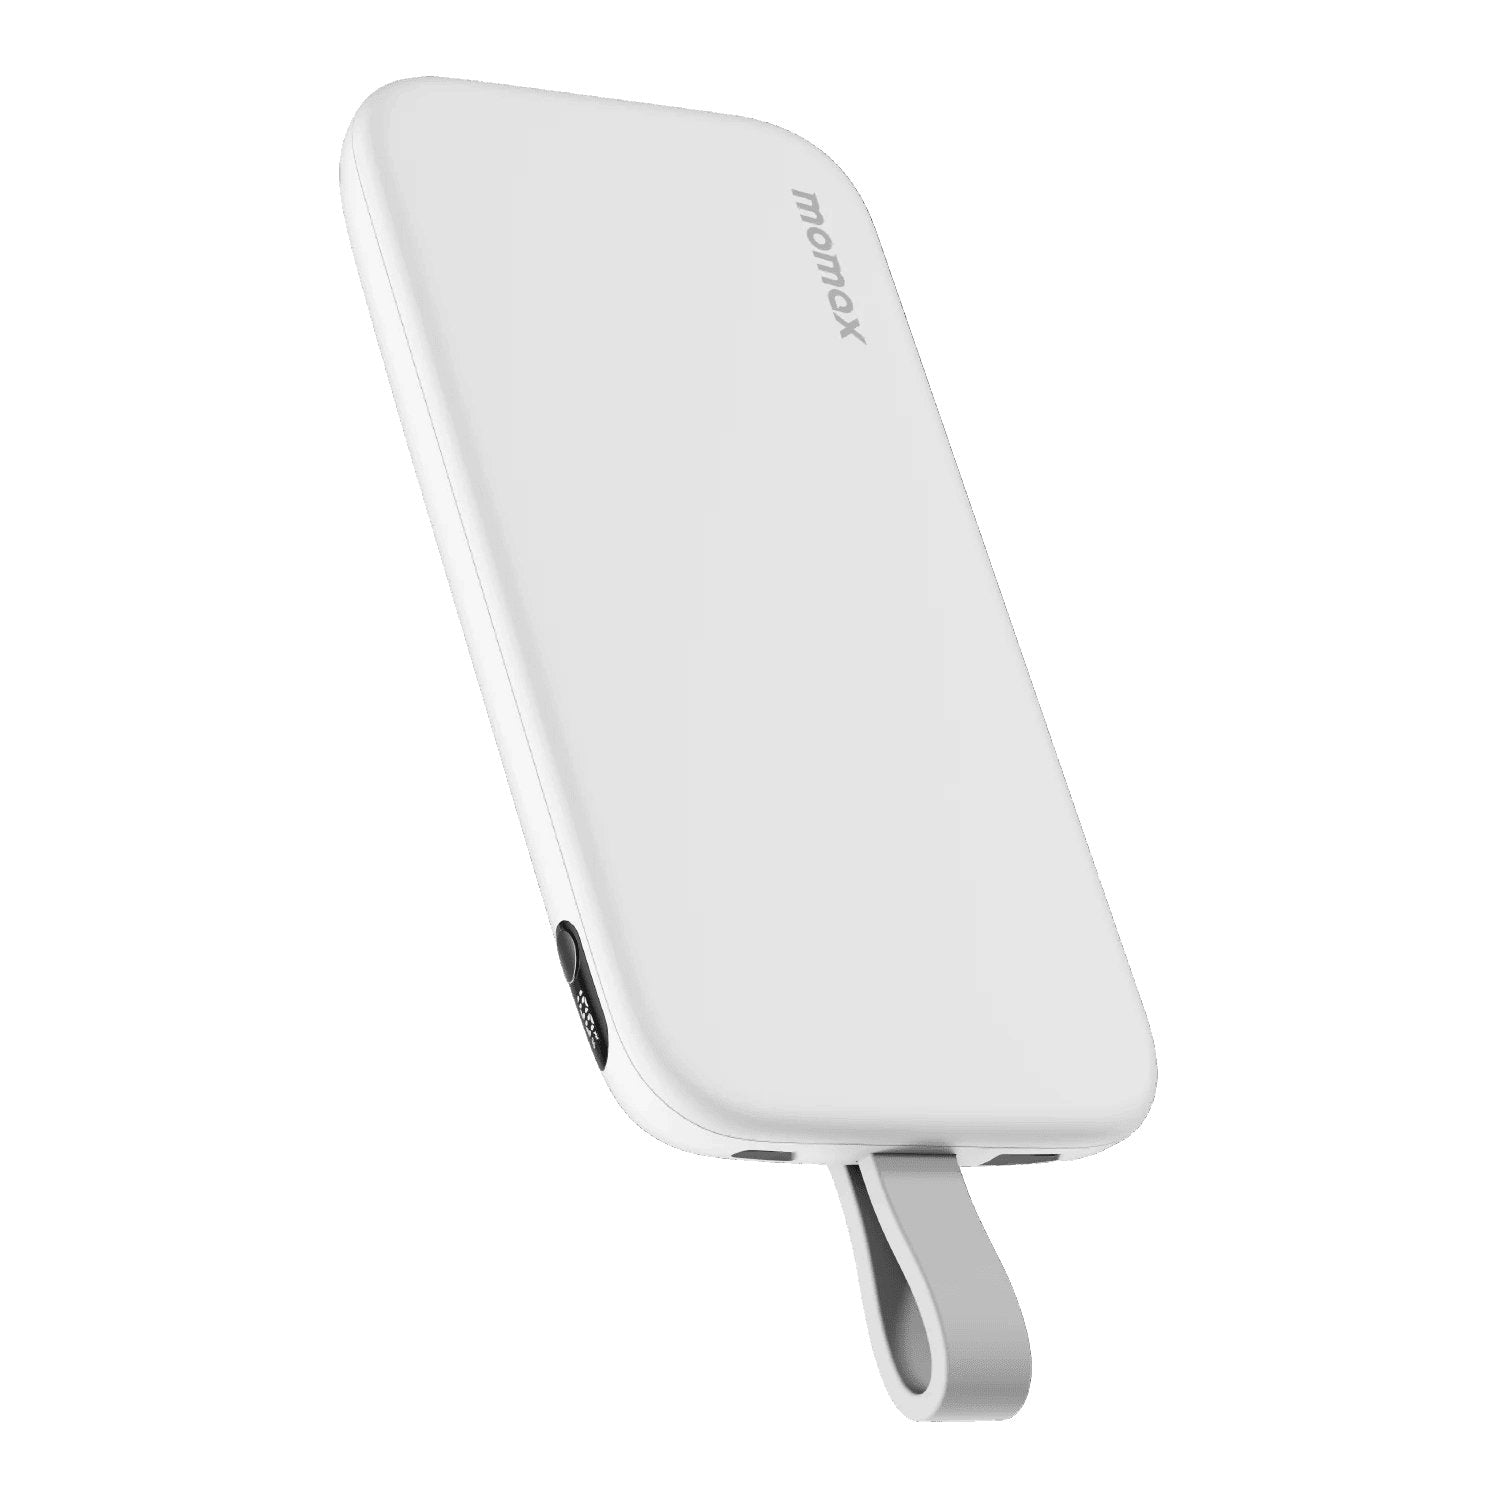 Momax iPower PD 3 10000mAh Built-in USB-C Power Bank - XPRS